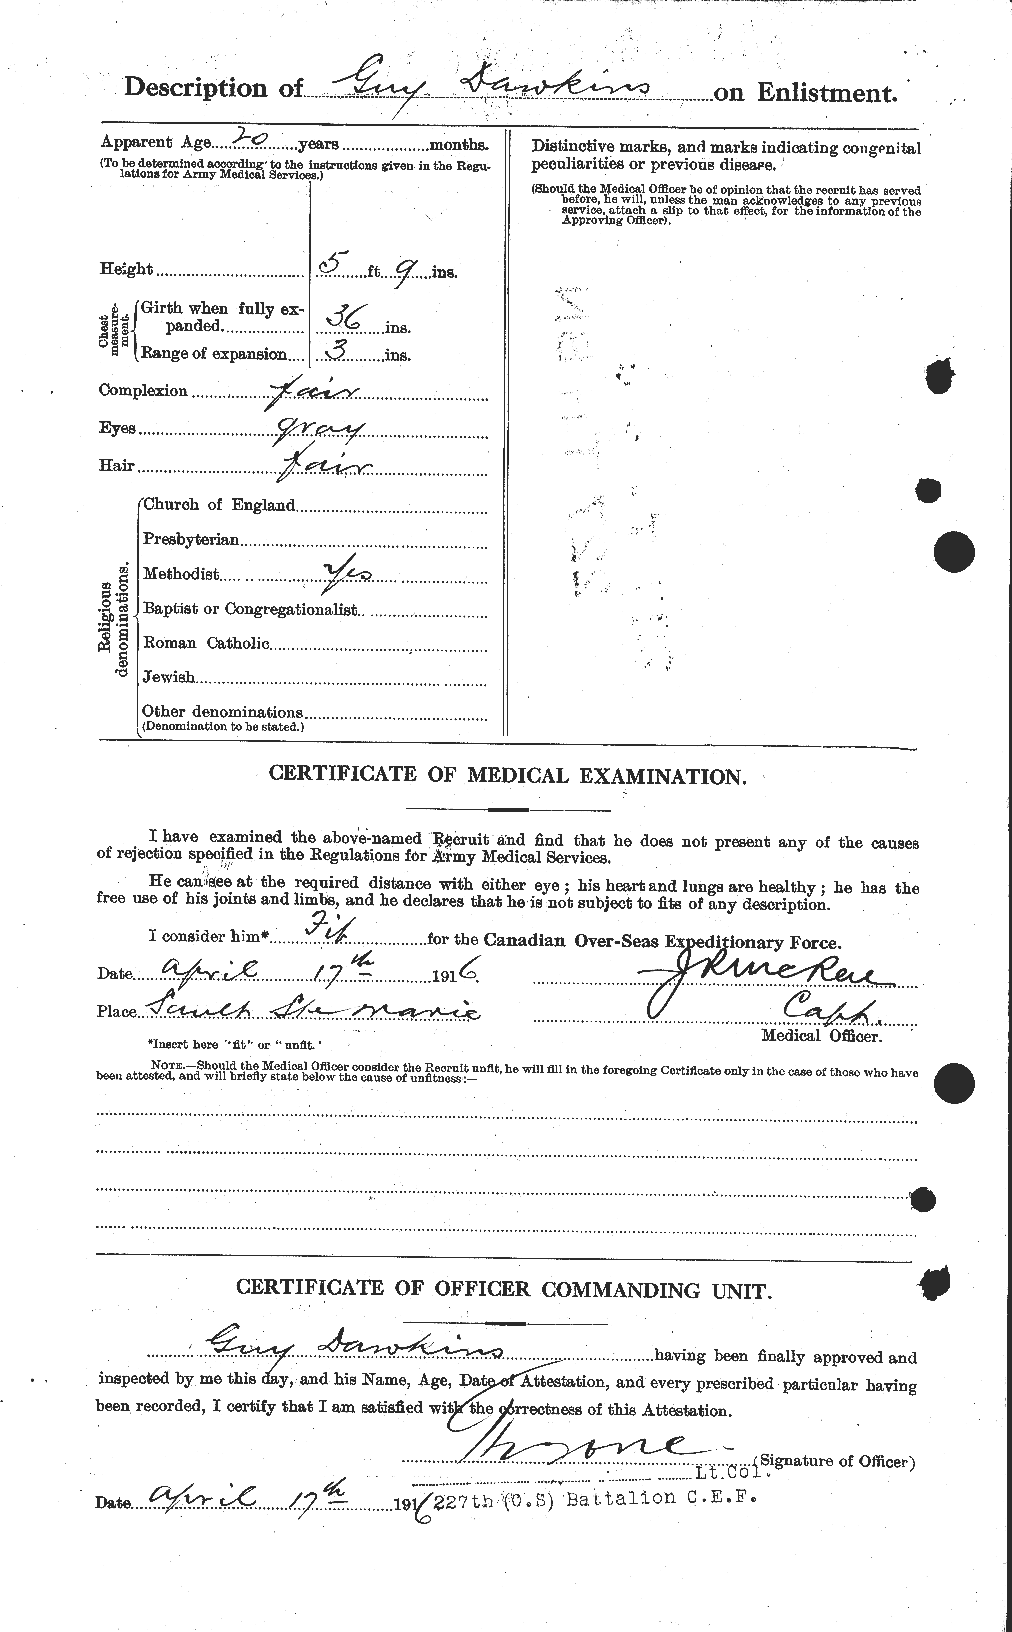 Personnel Records of the First World War - CEF 283127b